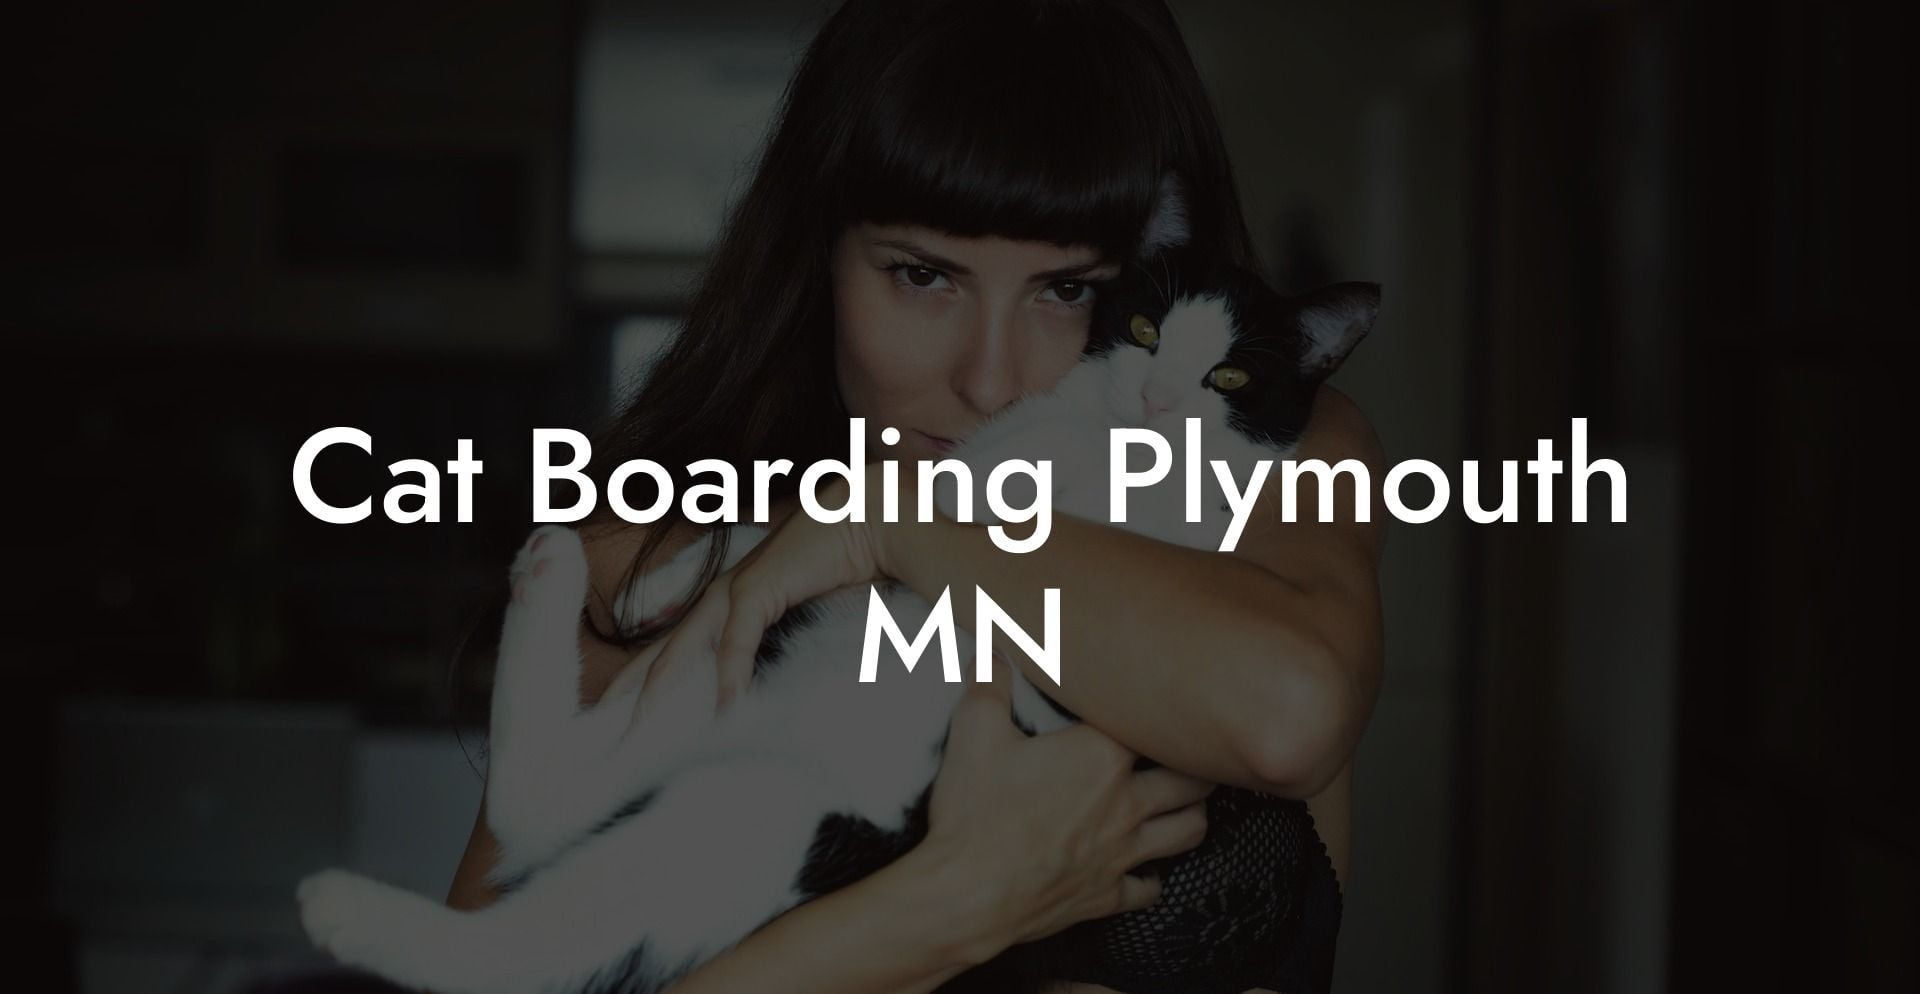 Cat Boarding Plymouth MN